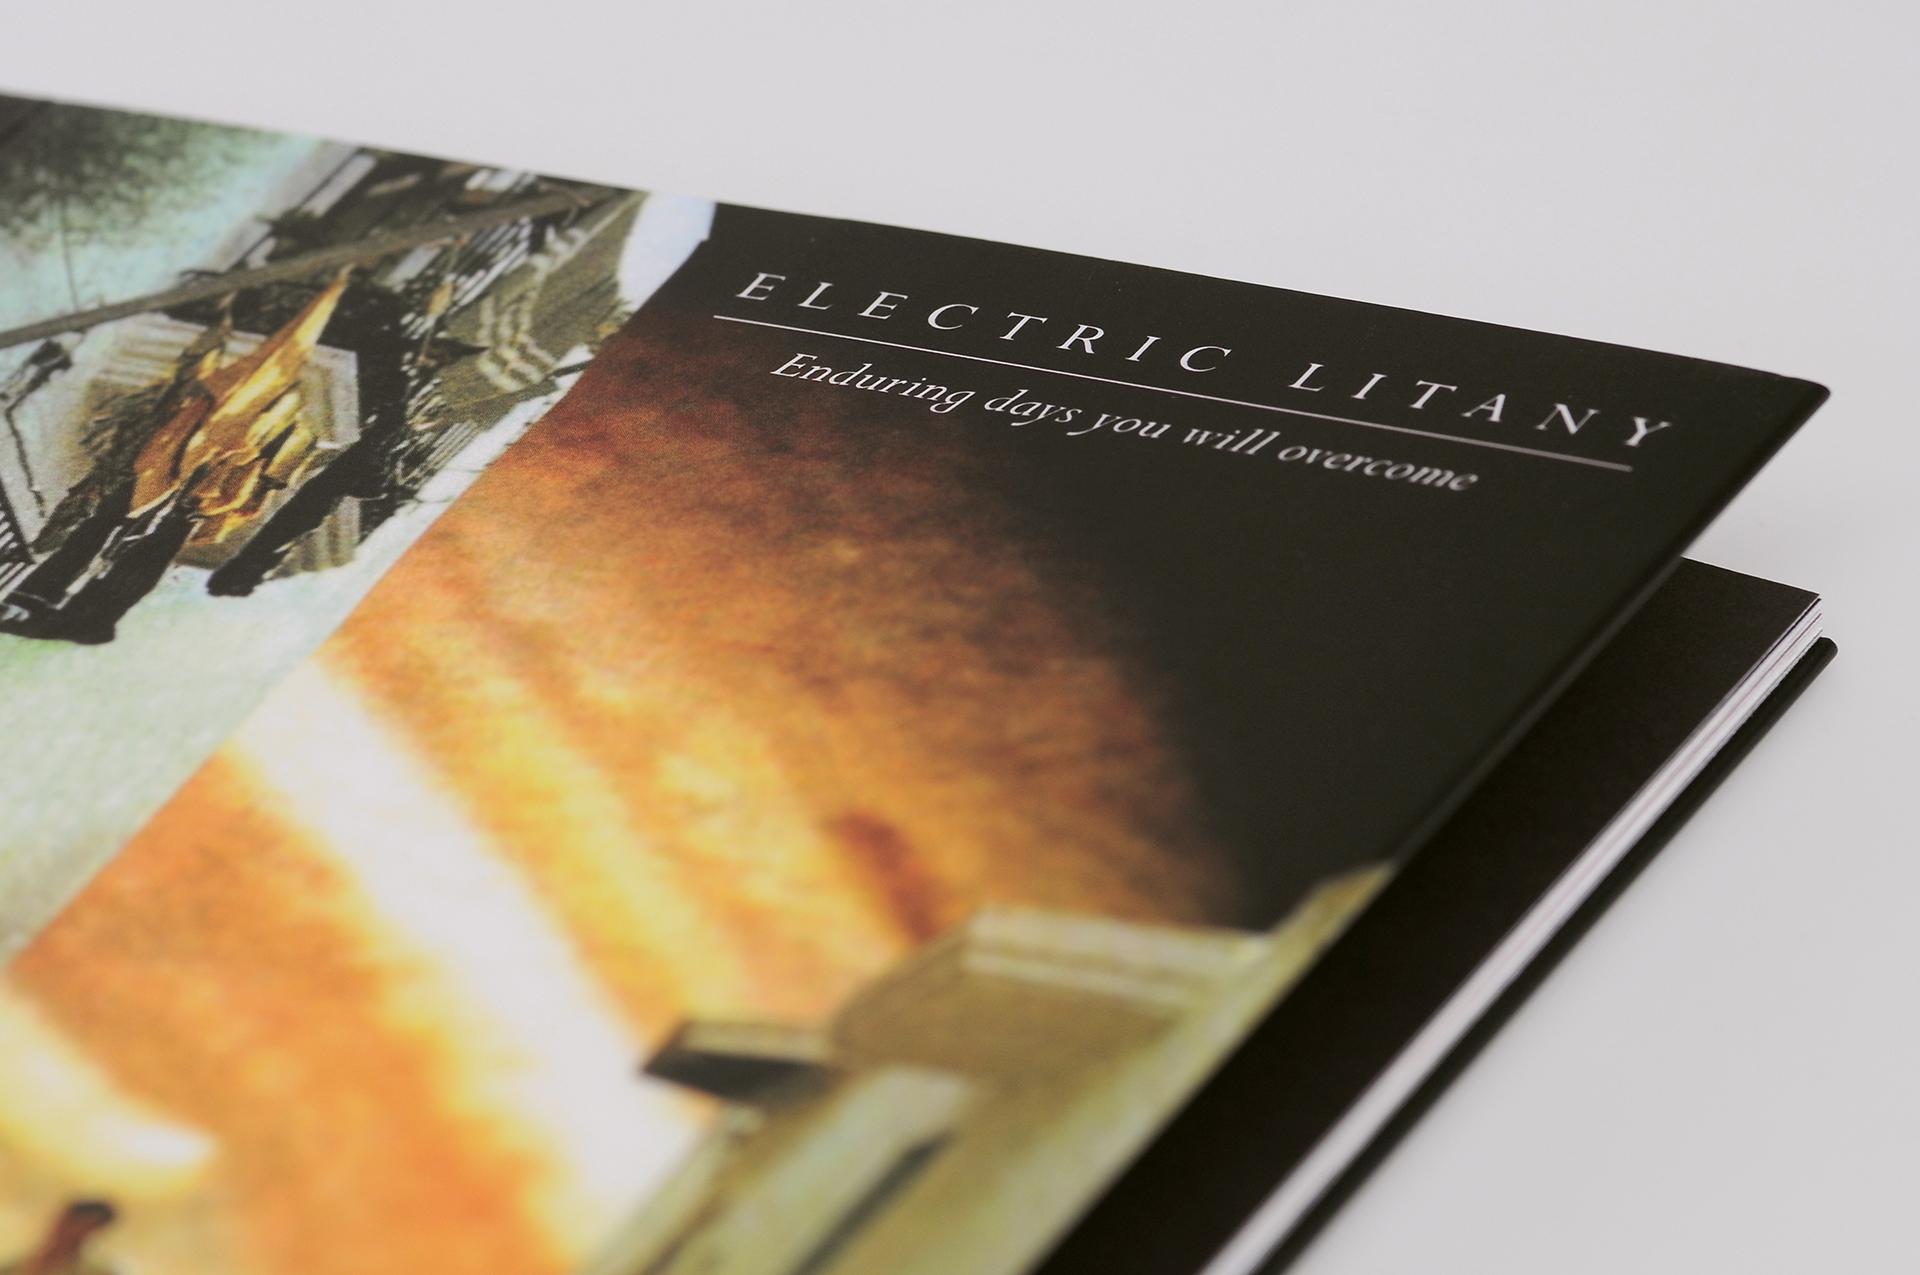 Electric Litany CD cover